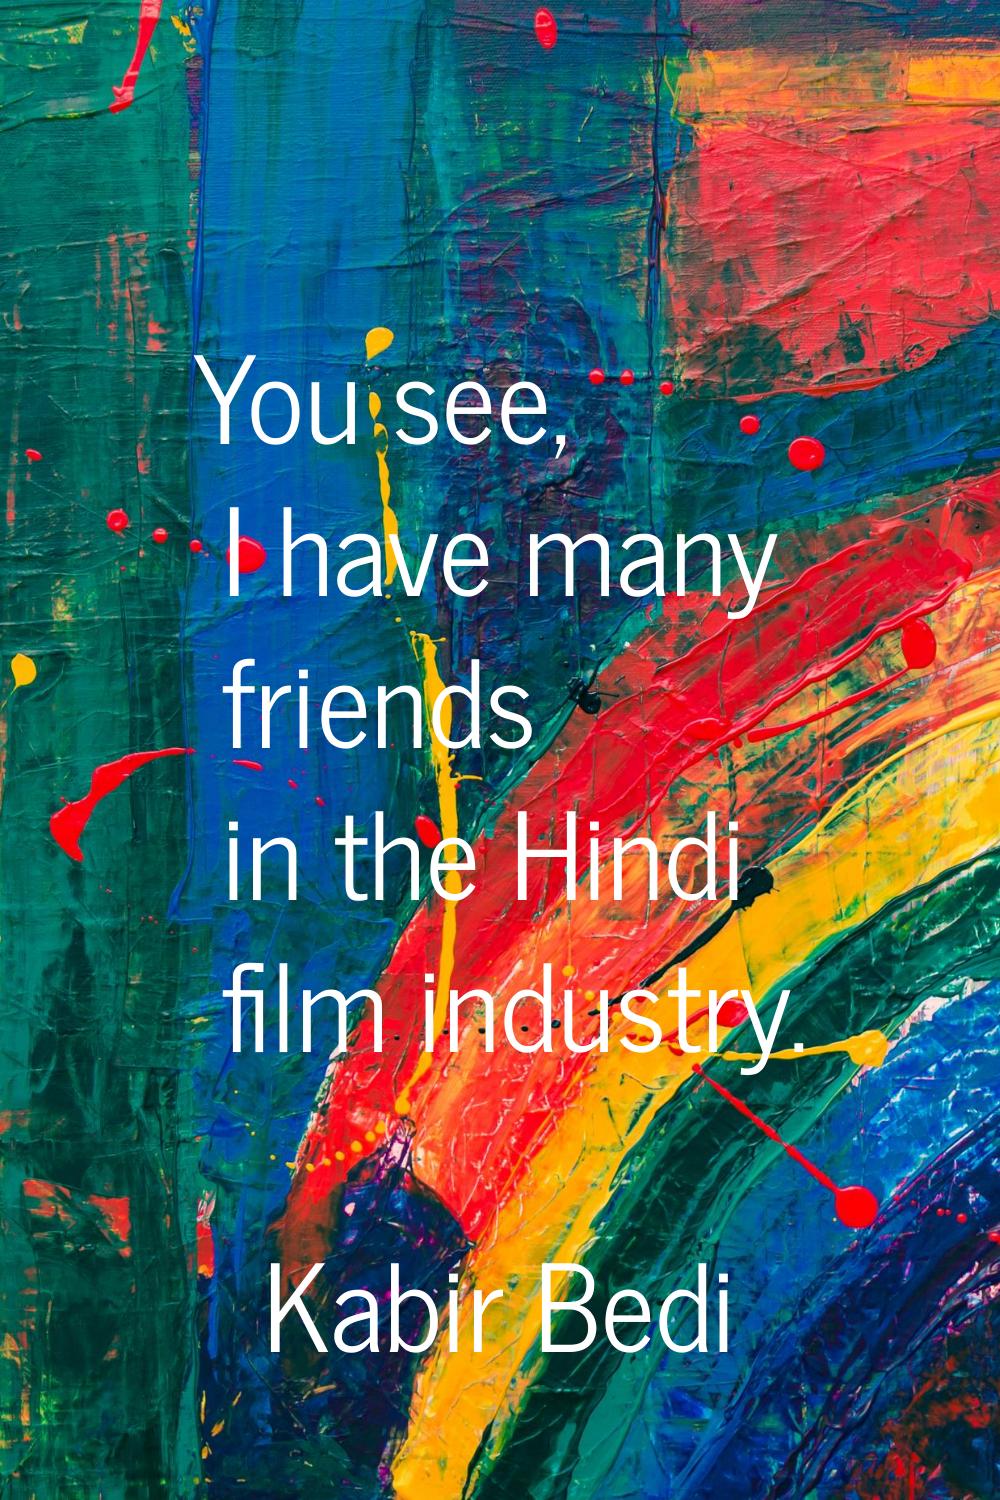 You see, I have many friends in the Hindi film industry.